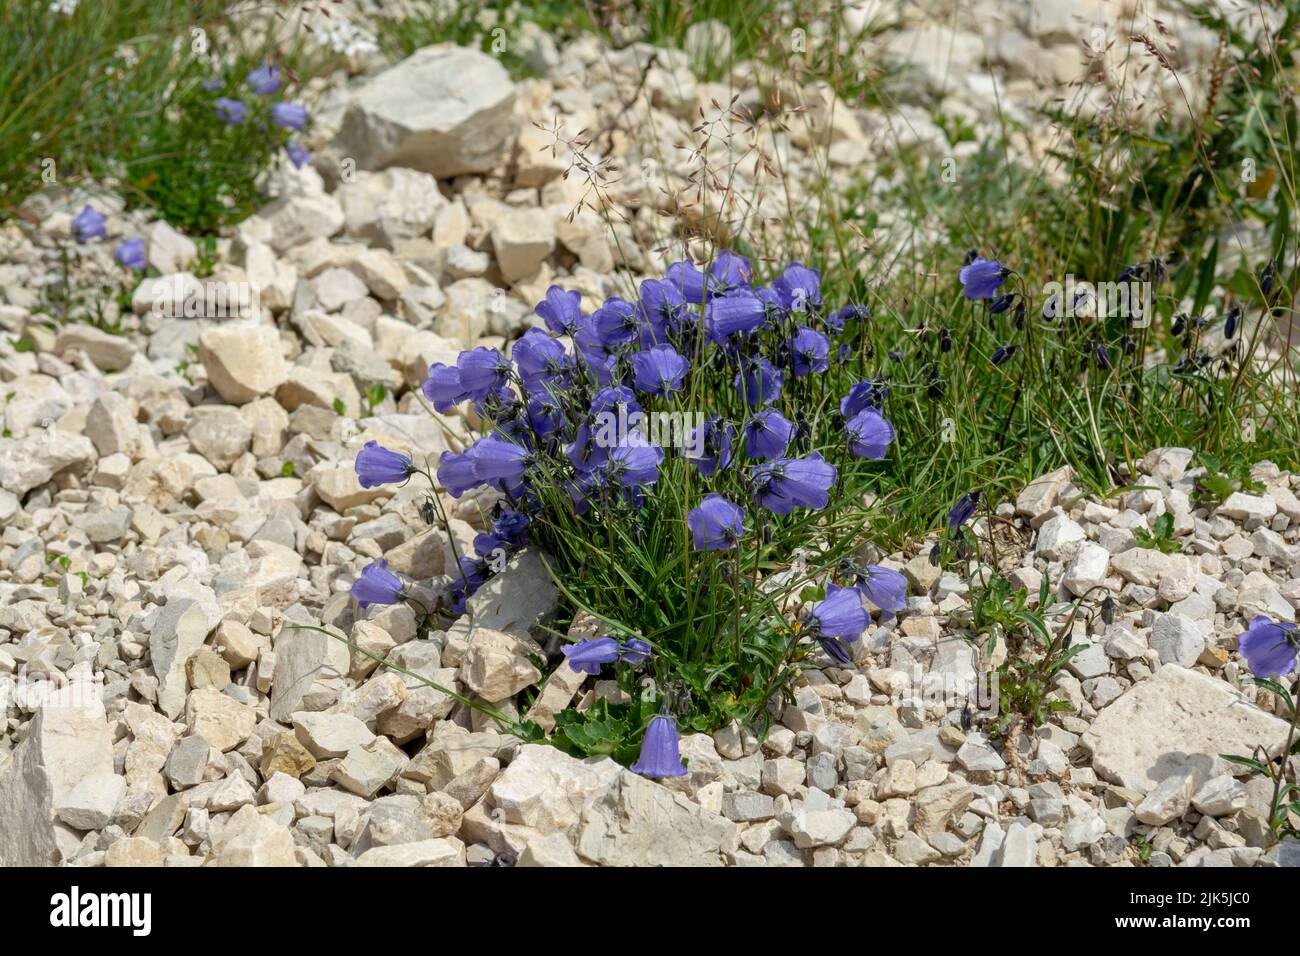 Blooming alpian bellflower or campanula morettiana. Flowering campanula di moretti or  moretti glockenblume in Dolomites. Italy. Stock Photo